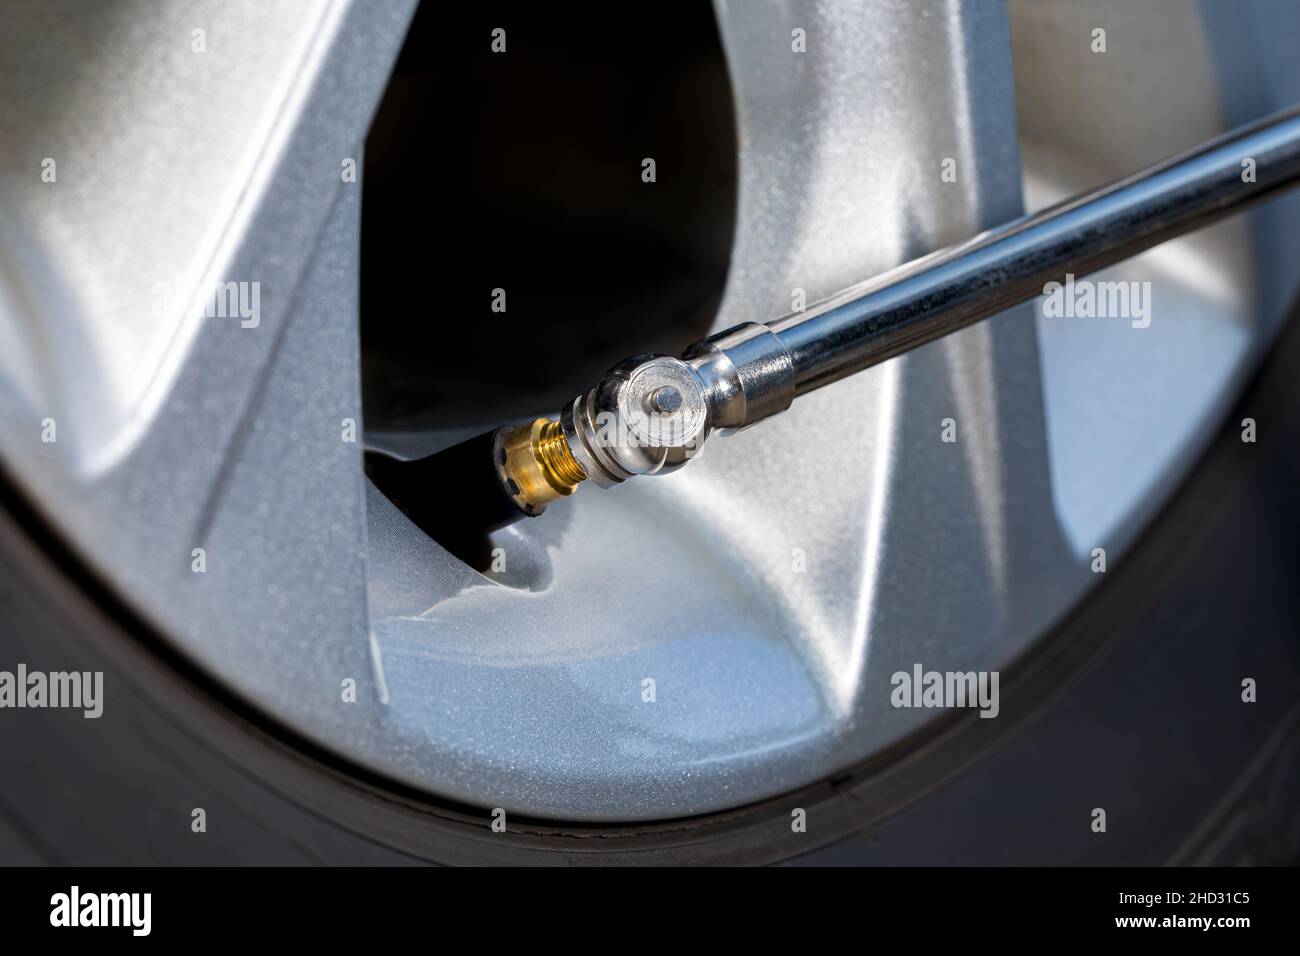 Air pressure gauge on tire valve stem of car wheel. Vehicle safety, tire wear, fuel mileage and winter checkup concept. Stock Photo